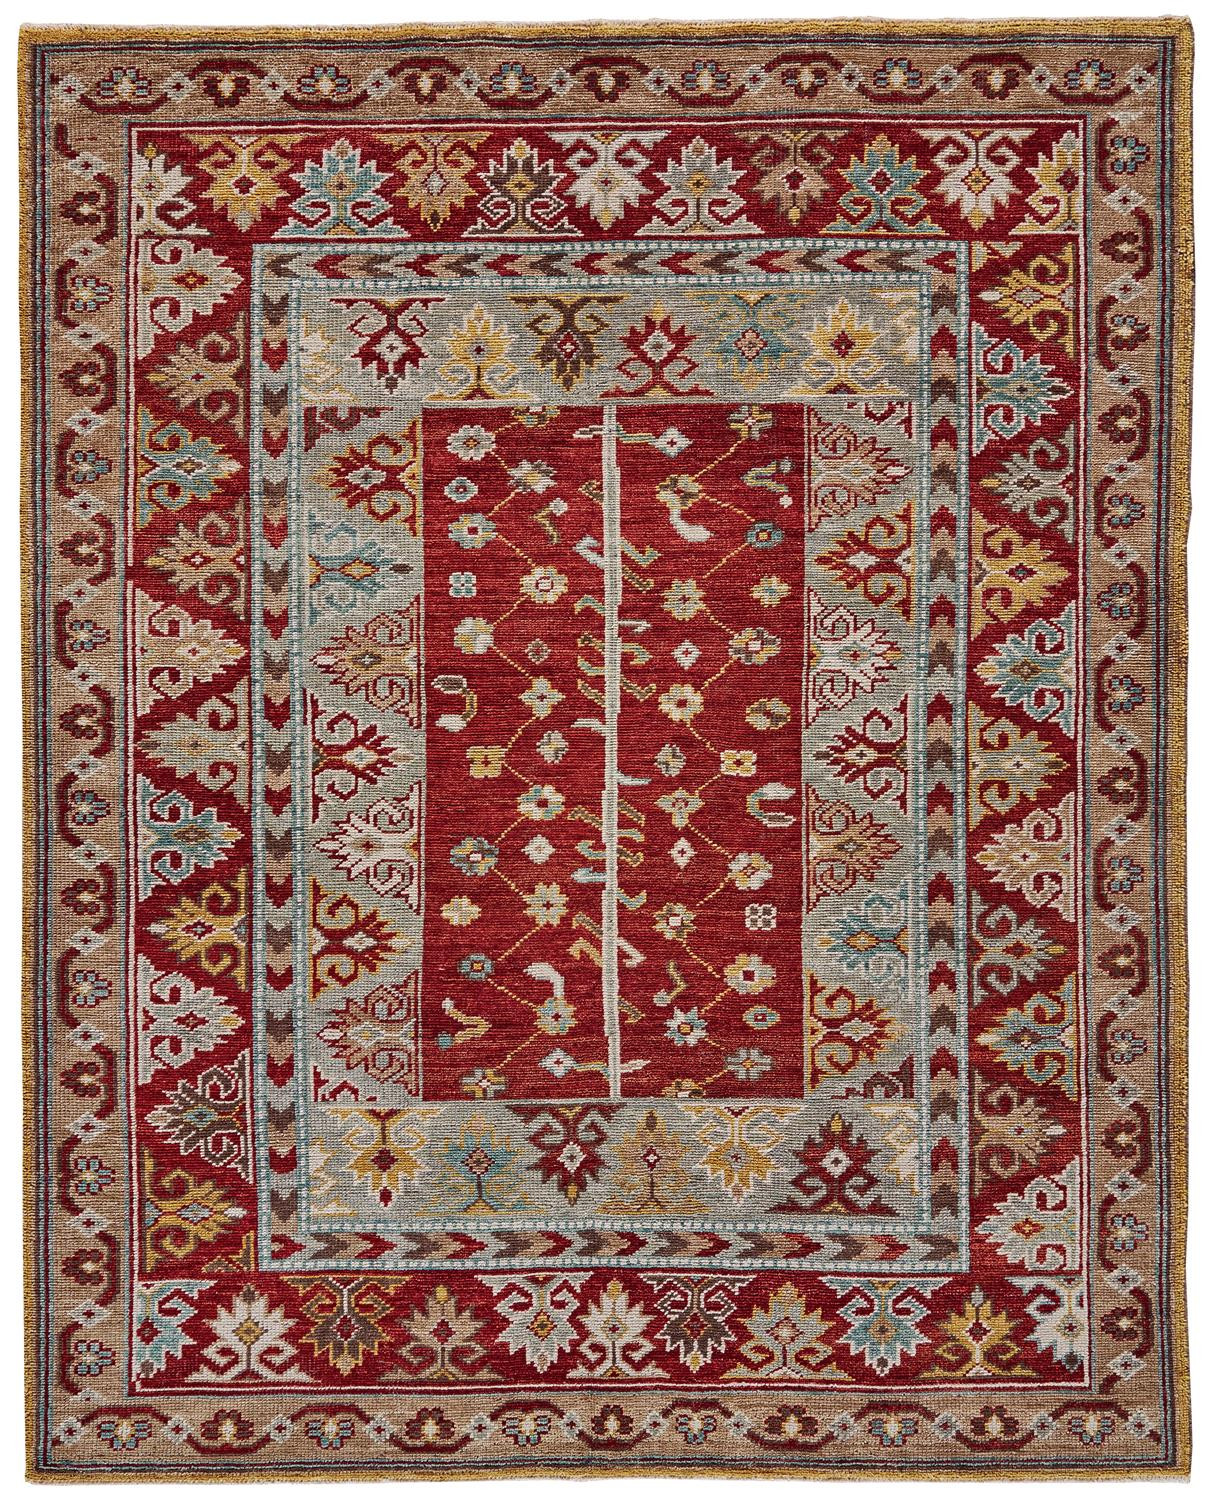 2' X 3' Red Blue And Brown Wool Floral Hand Knotted Distressed Stain Resistant Area Rug With Fringe-511608-1